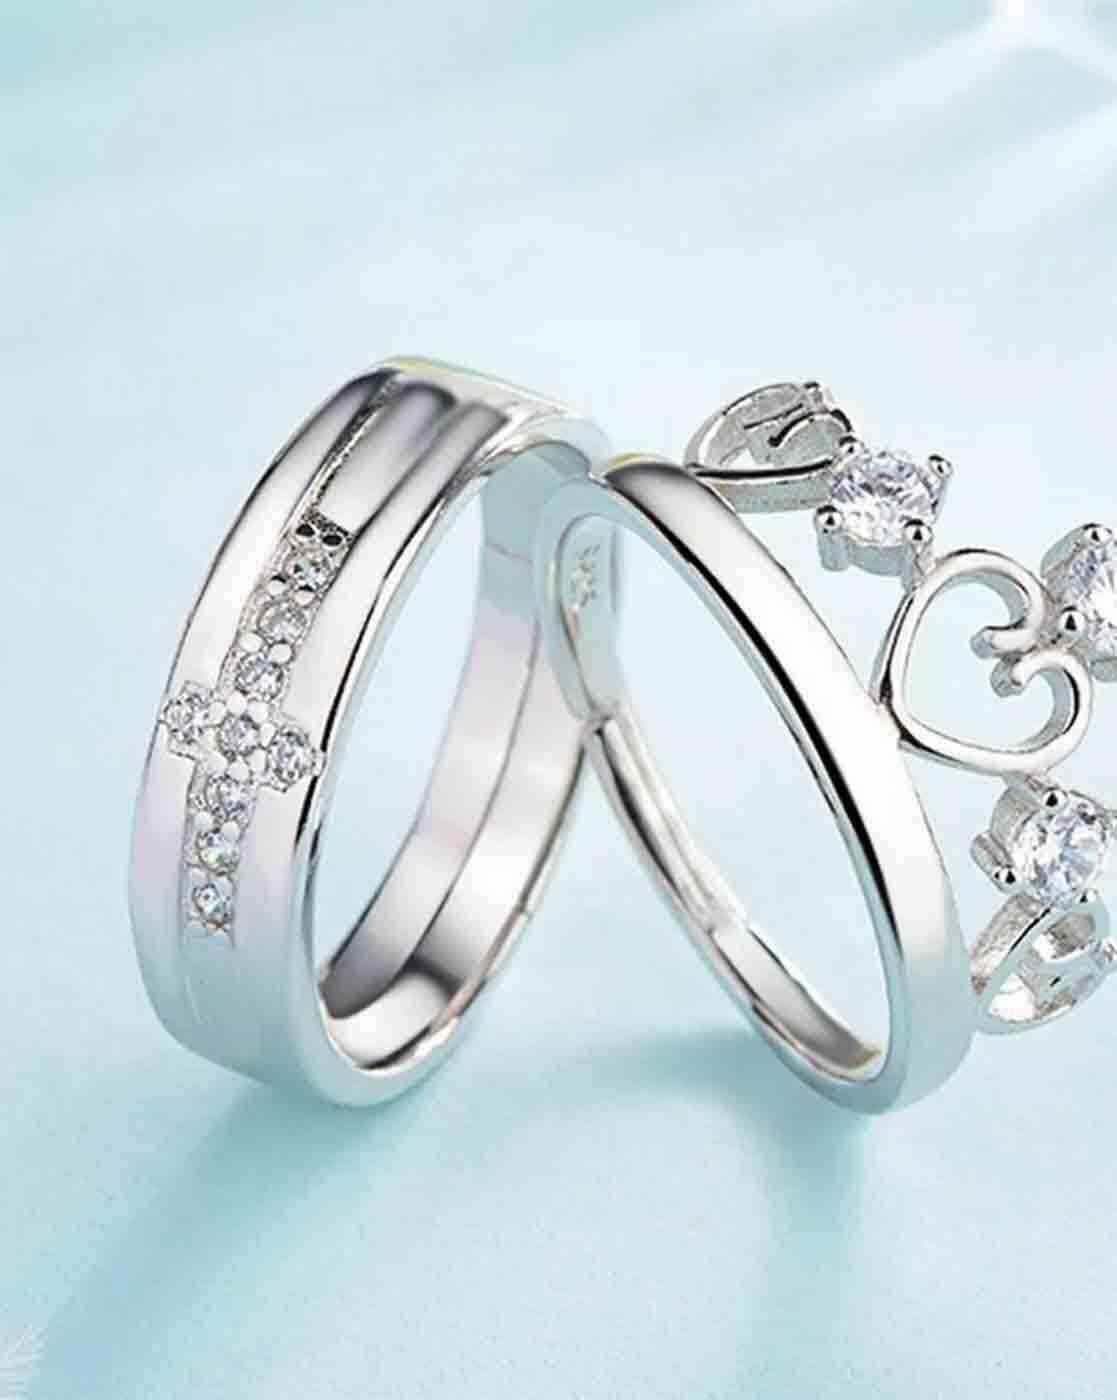 KING AND QUEEN COUPLE RINGS – Sterlyn